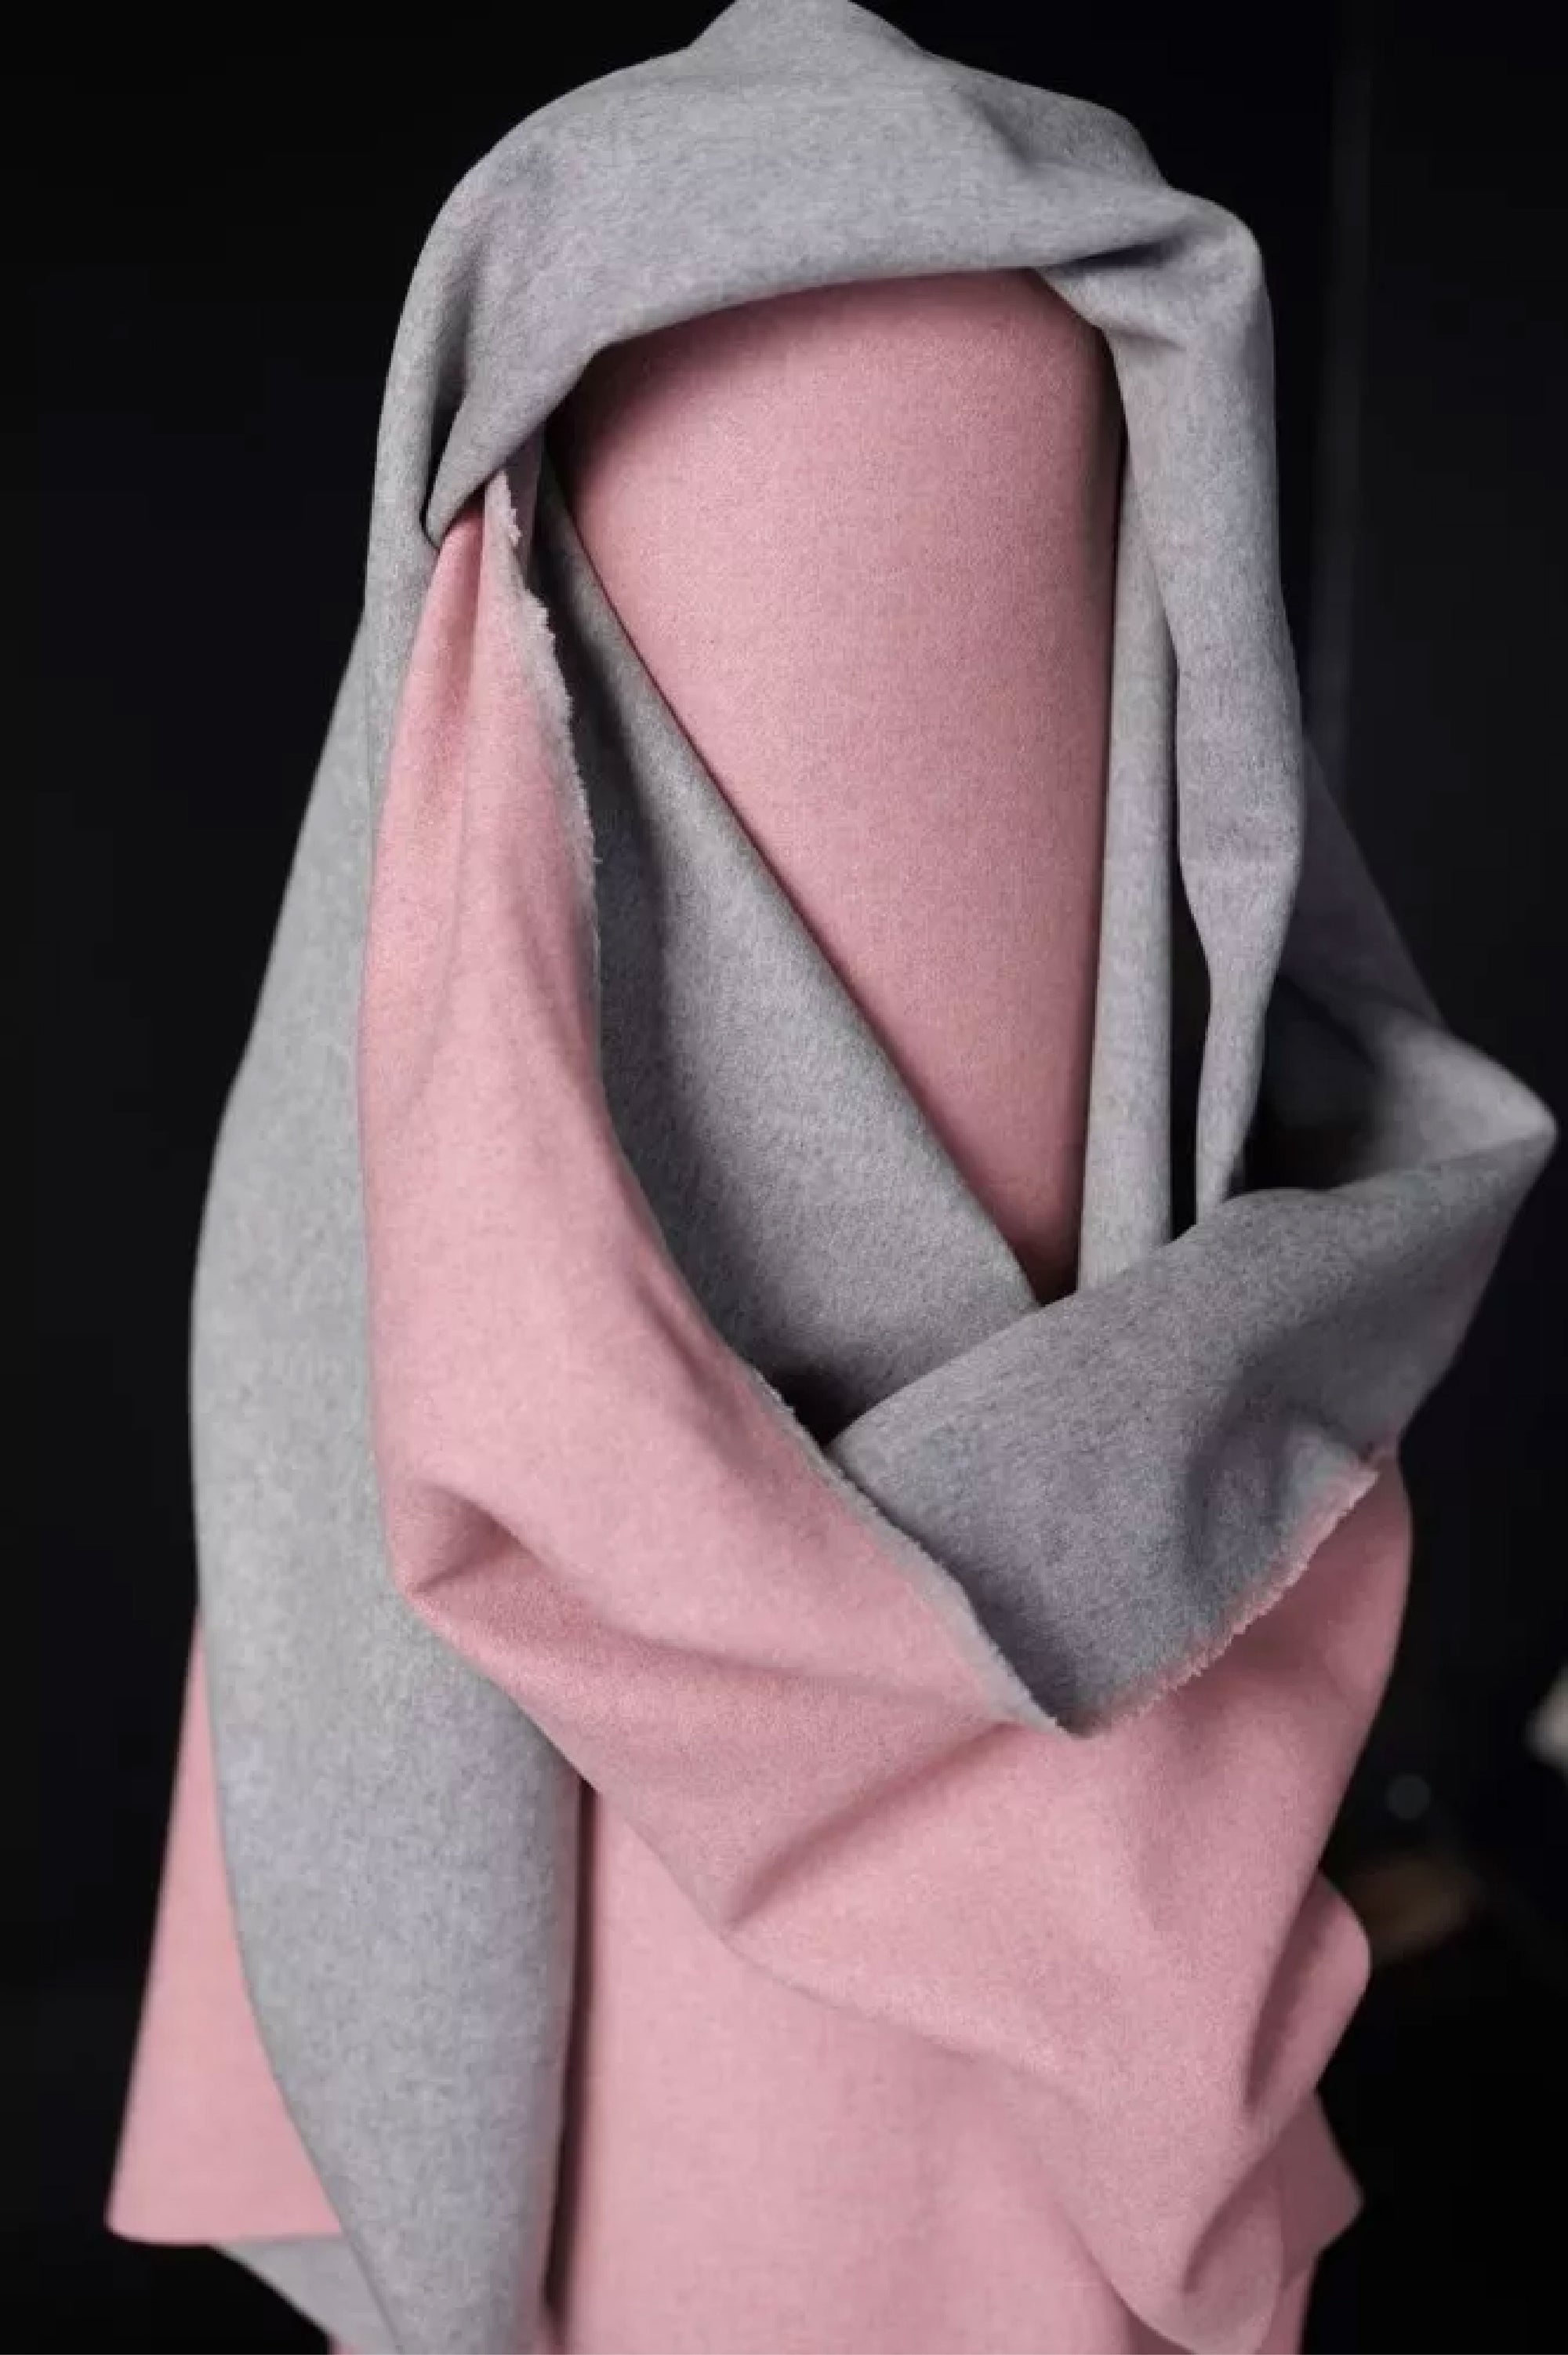 A roll of A soft and bouncy two toned wool in bright bubblegum pink on one side and grey marl on the other. On a Black background.